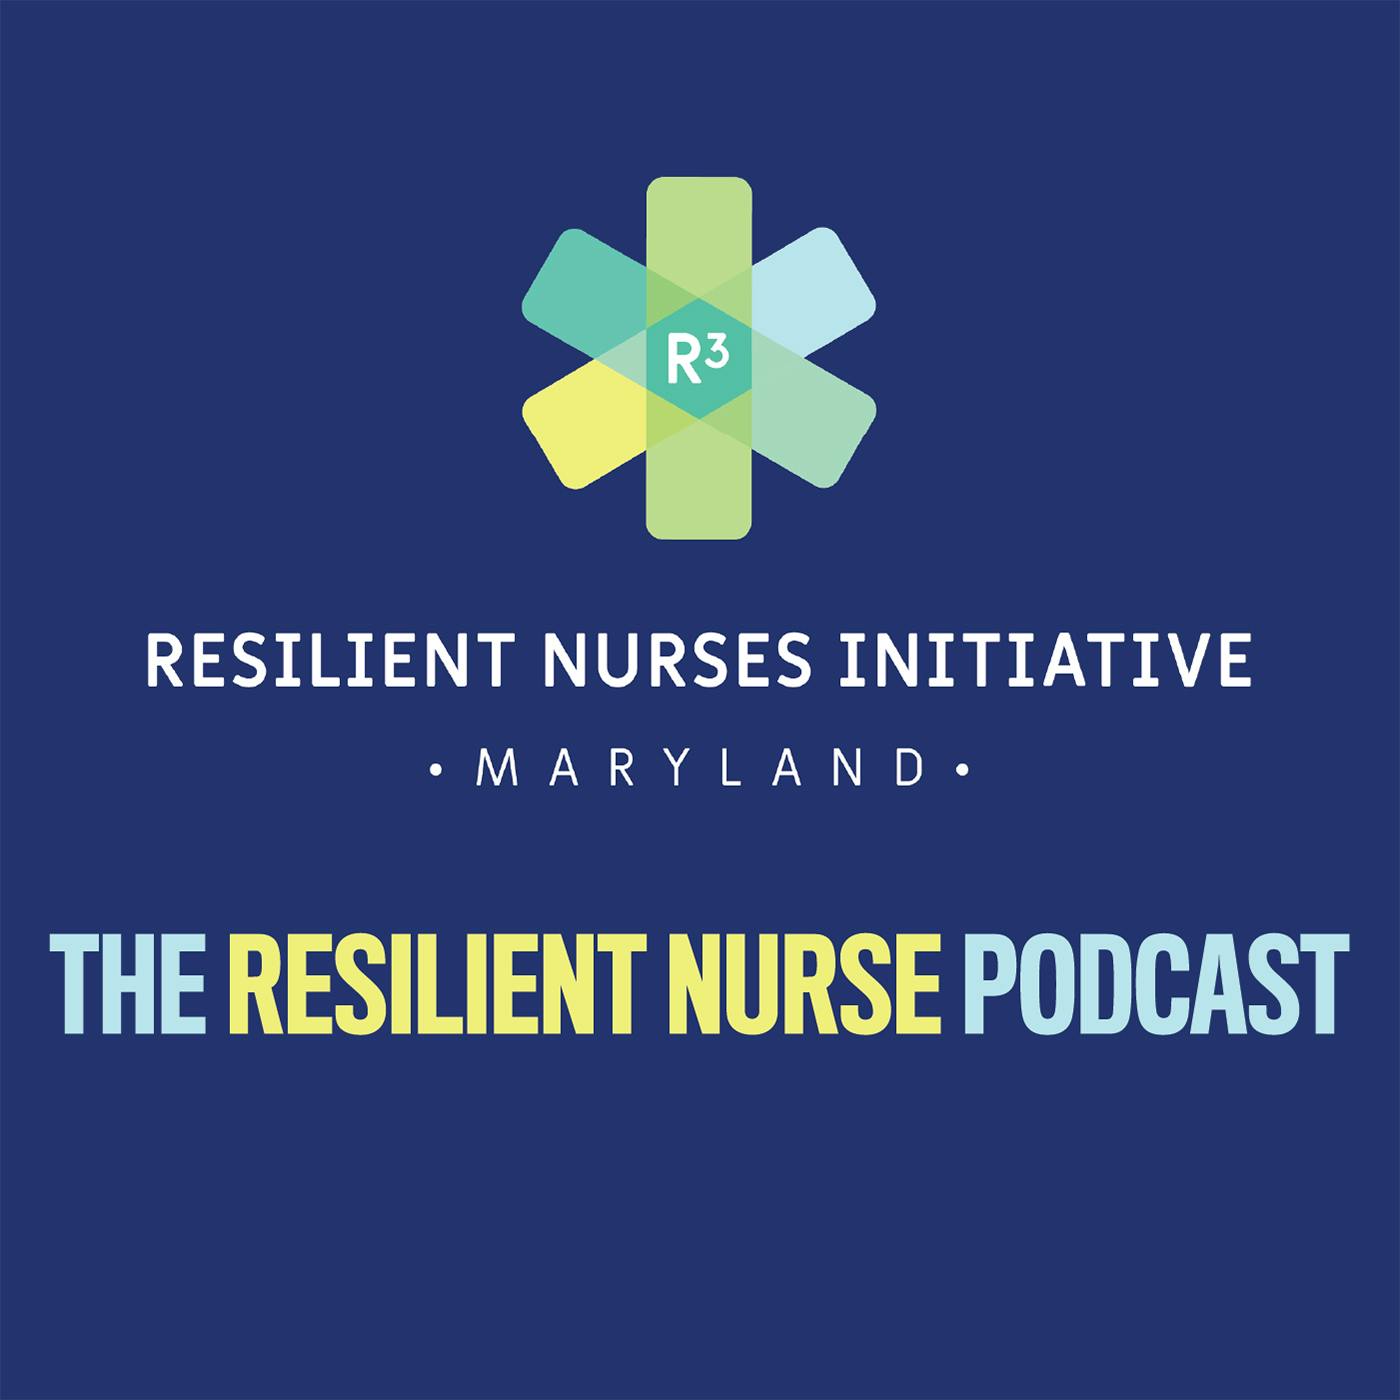 The Resilient Nurse, Episode 1: Harnessing Nurses’ Resilience